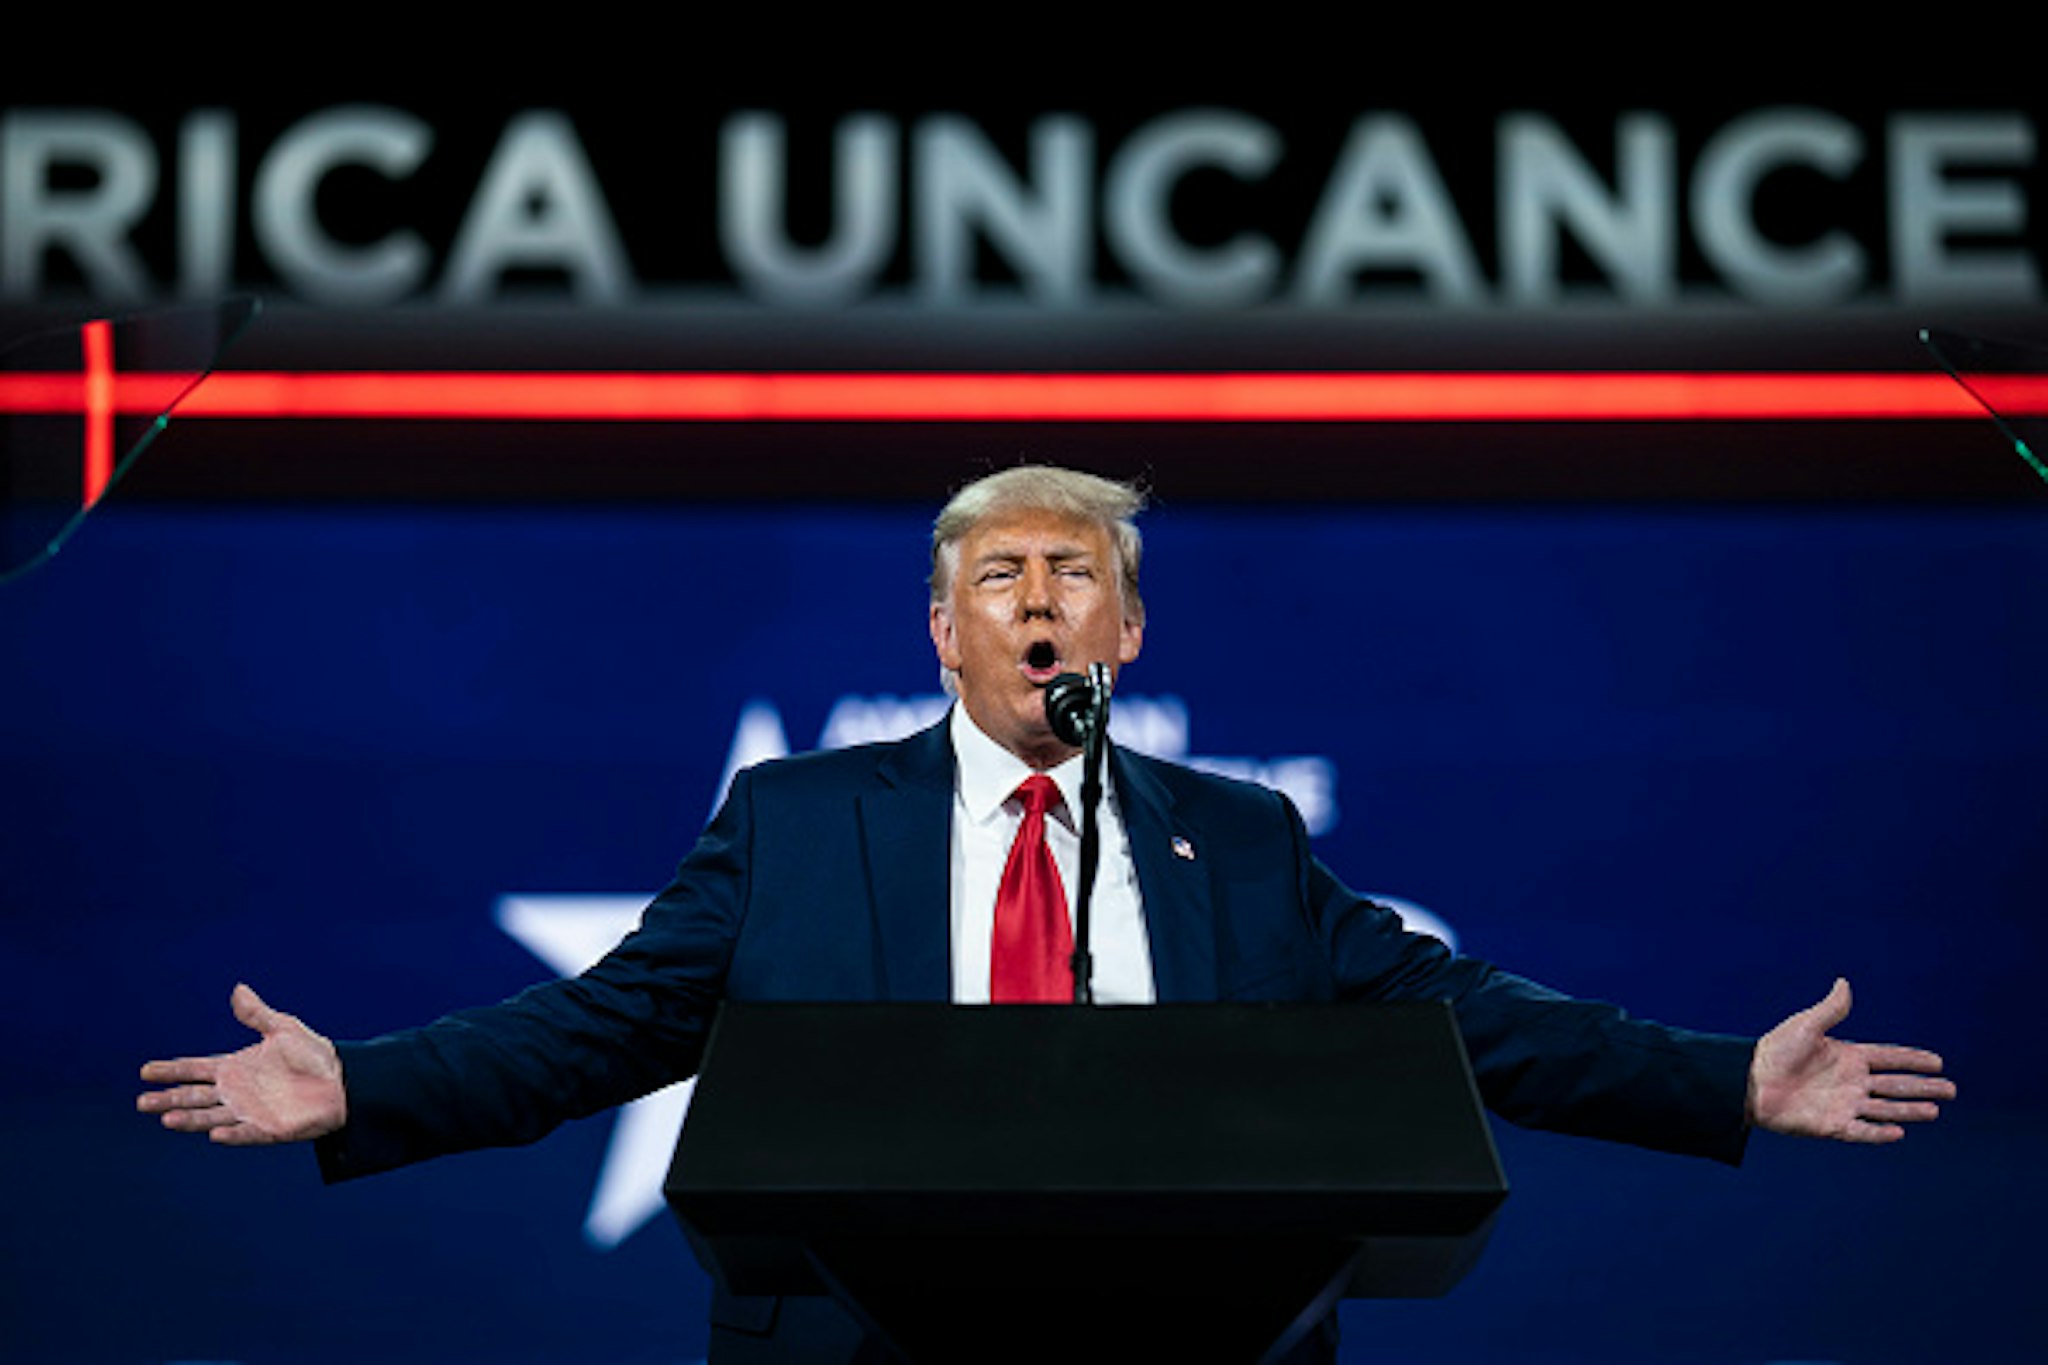 ORLANDO, FL - FEBRUARY 28: Former President Donald J Trump speaks during the final day of the Conservative Political Action Conference CPAC held at the Hyatt Regency Orlando on Sunday, Feb 28, 2021 in Orlando, FL.